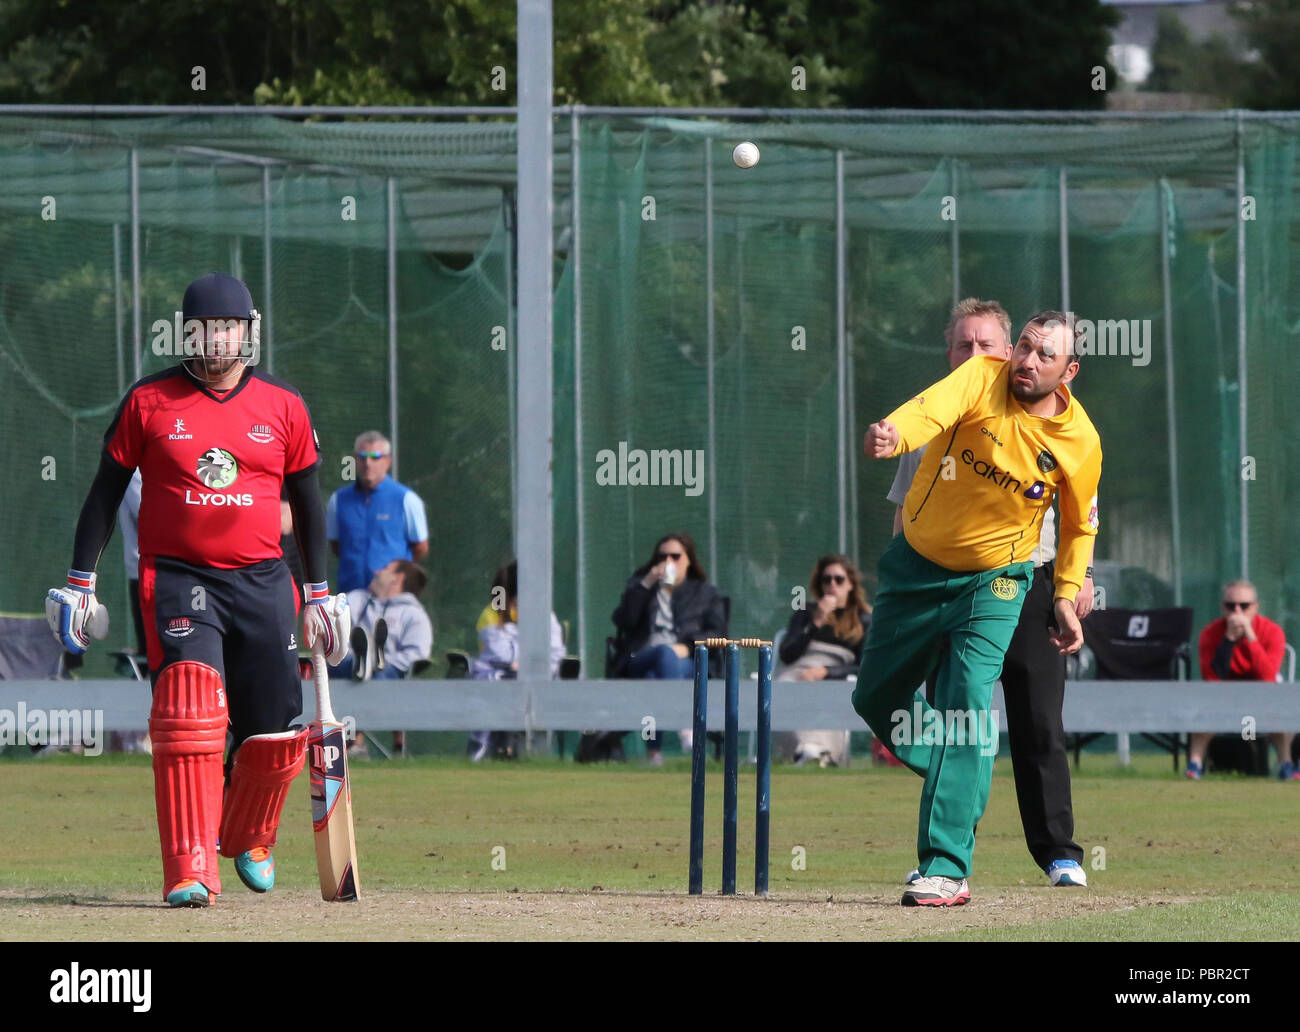 The Lawn, Waringstown, Northern Ireland, UK. 29 July, 2018. The Lagan Valley Steels Twenty 20 Cup Final 2018. Waringstown v North Down. Martin Moreland bowling for North Down. Credit: David Hunter/Alamy Live News. Stock Photo